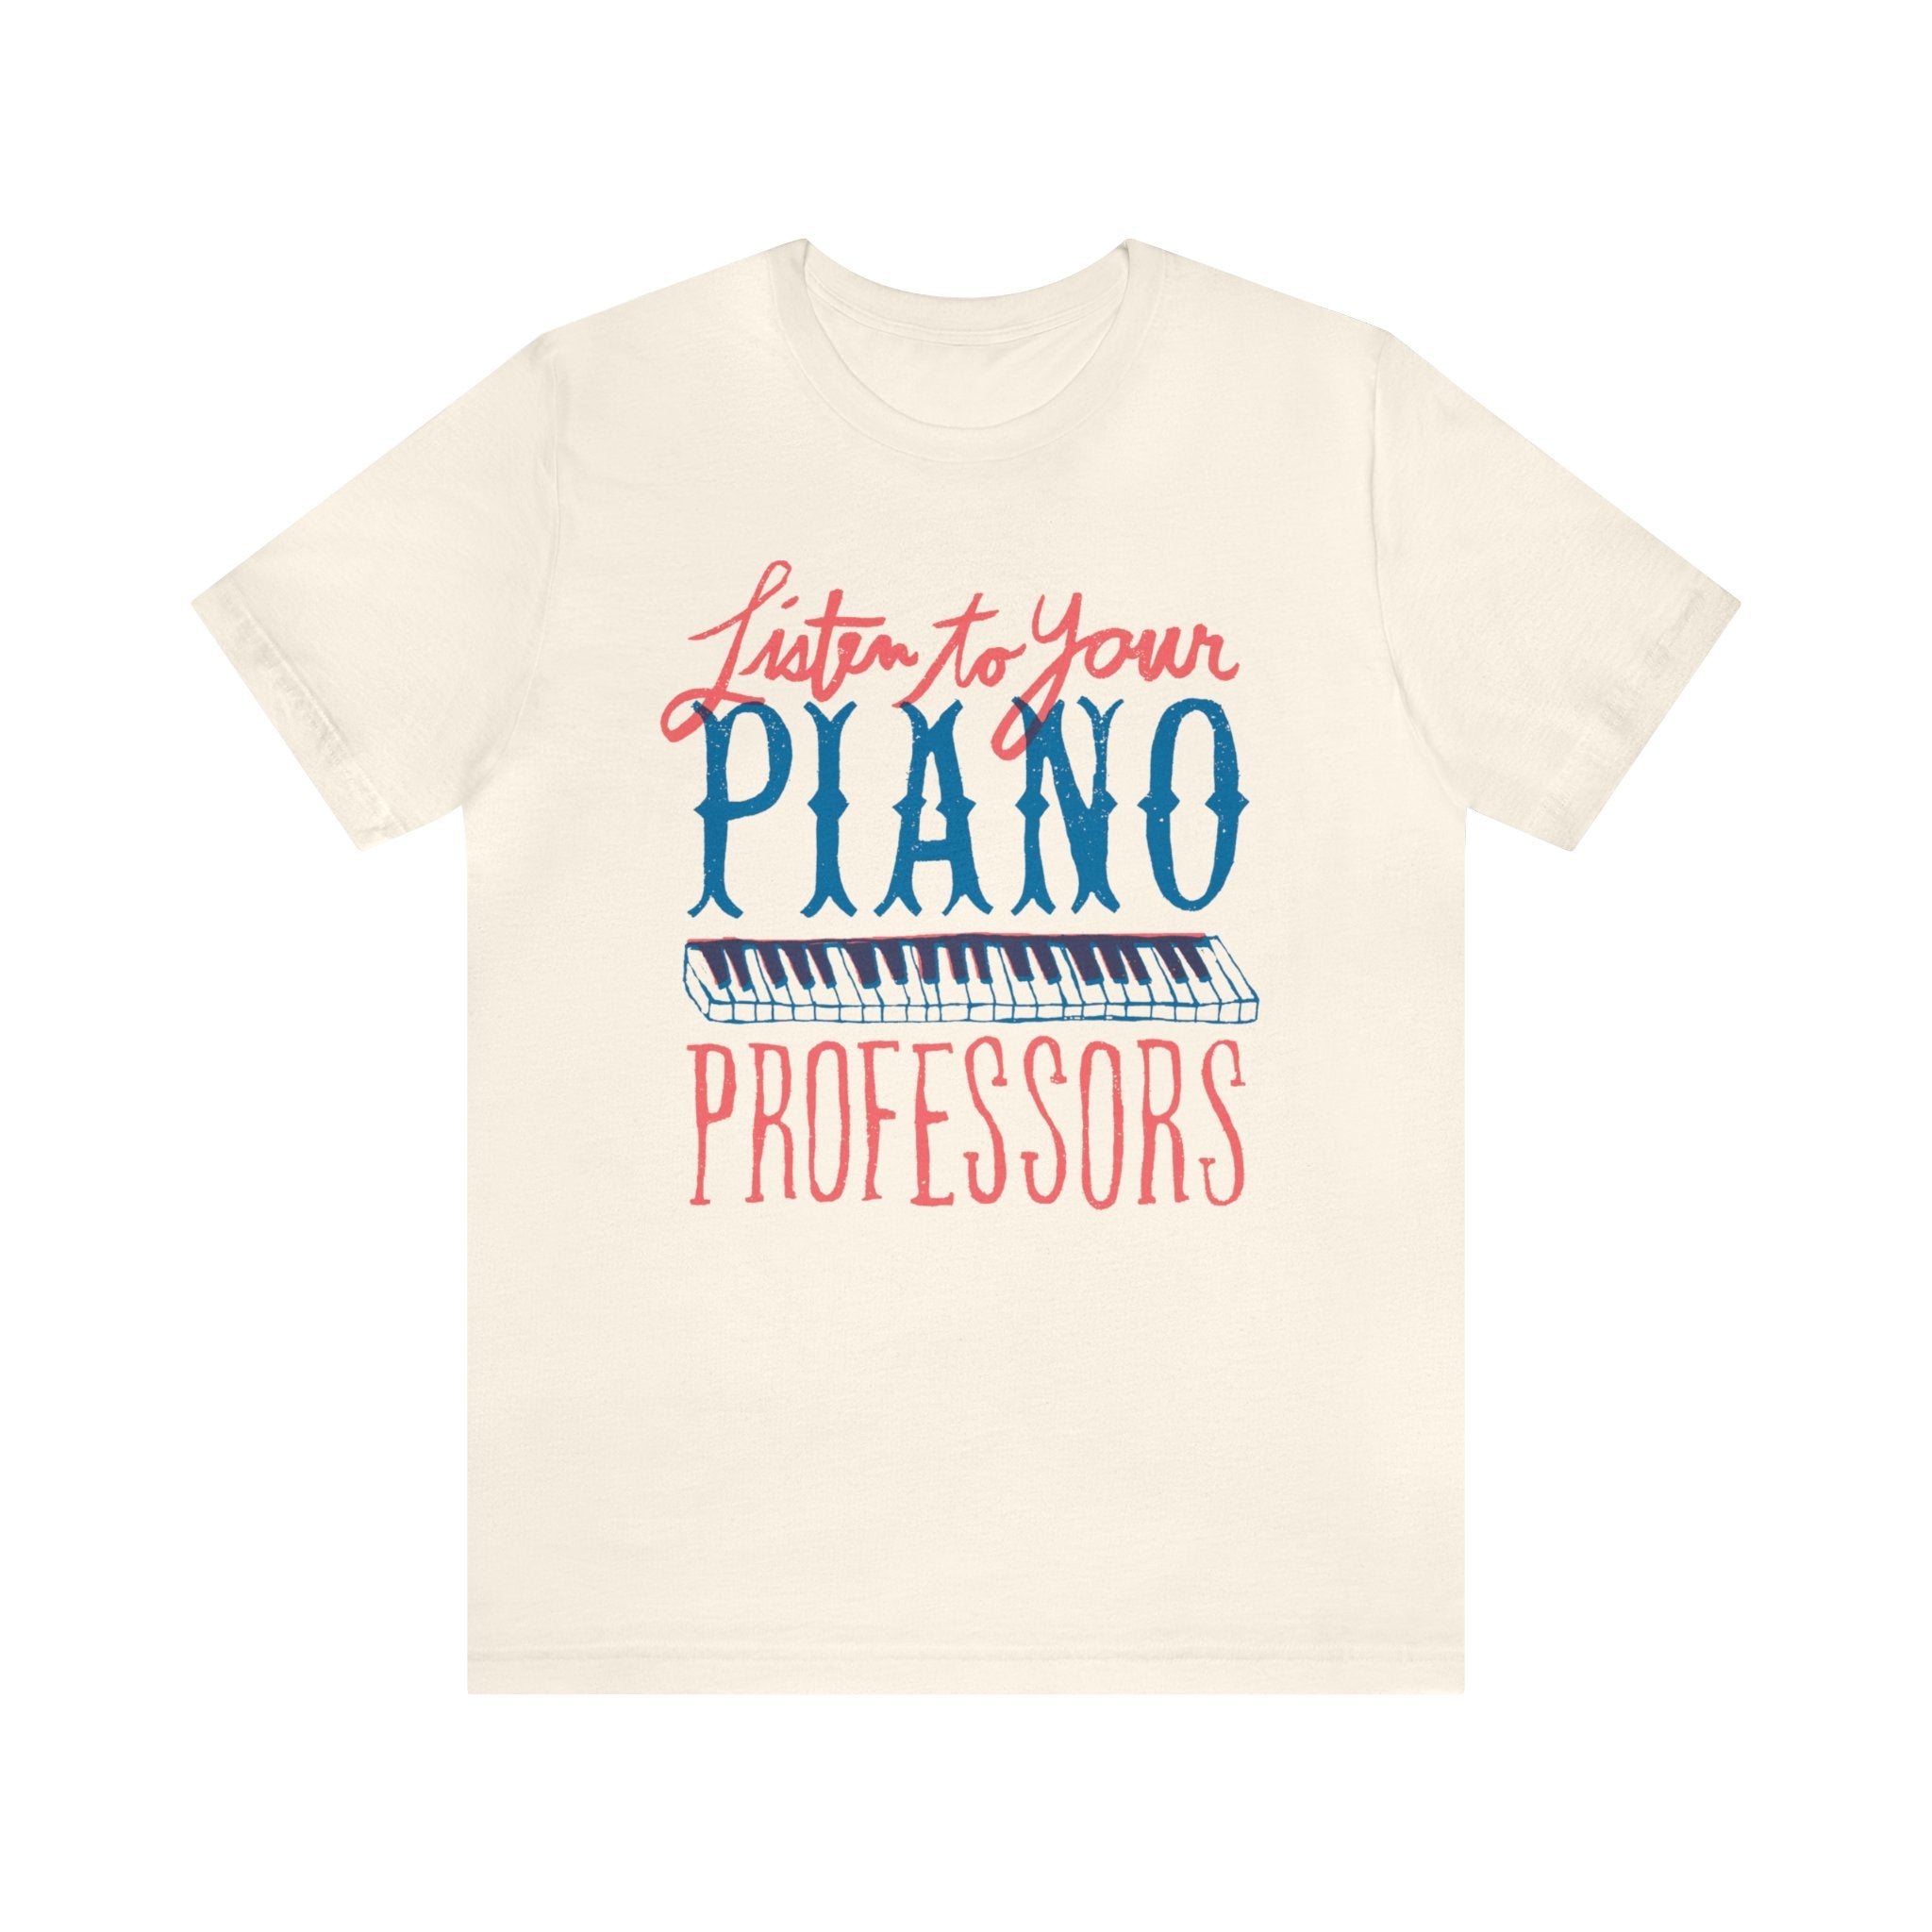 Listen To Your Piano Professors - Dirty Coast Press